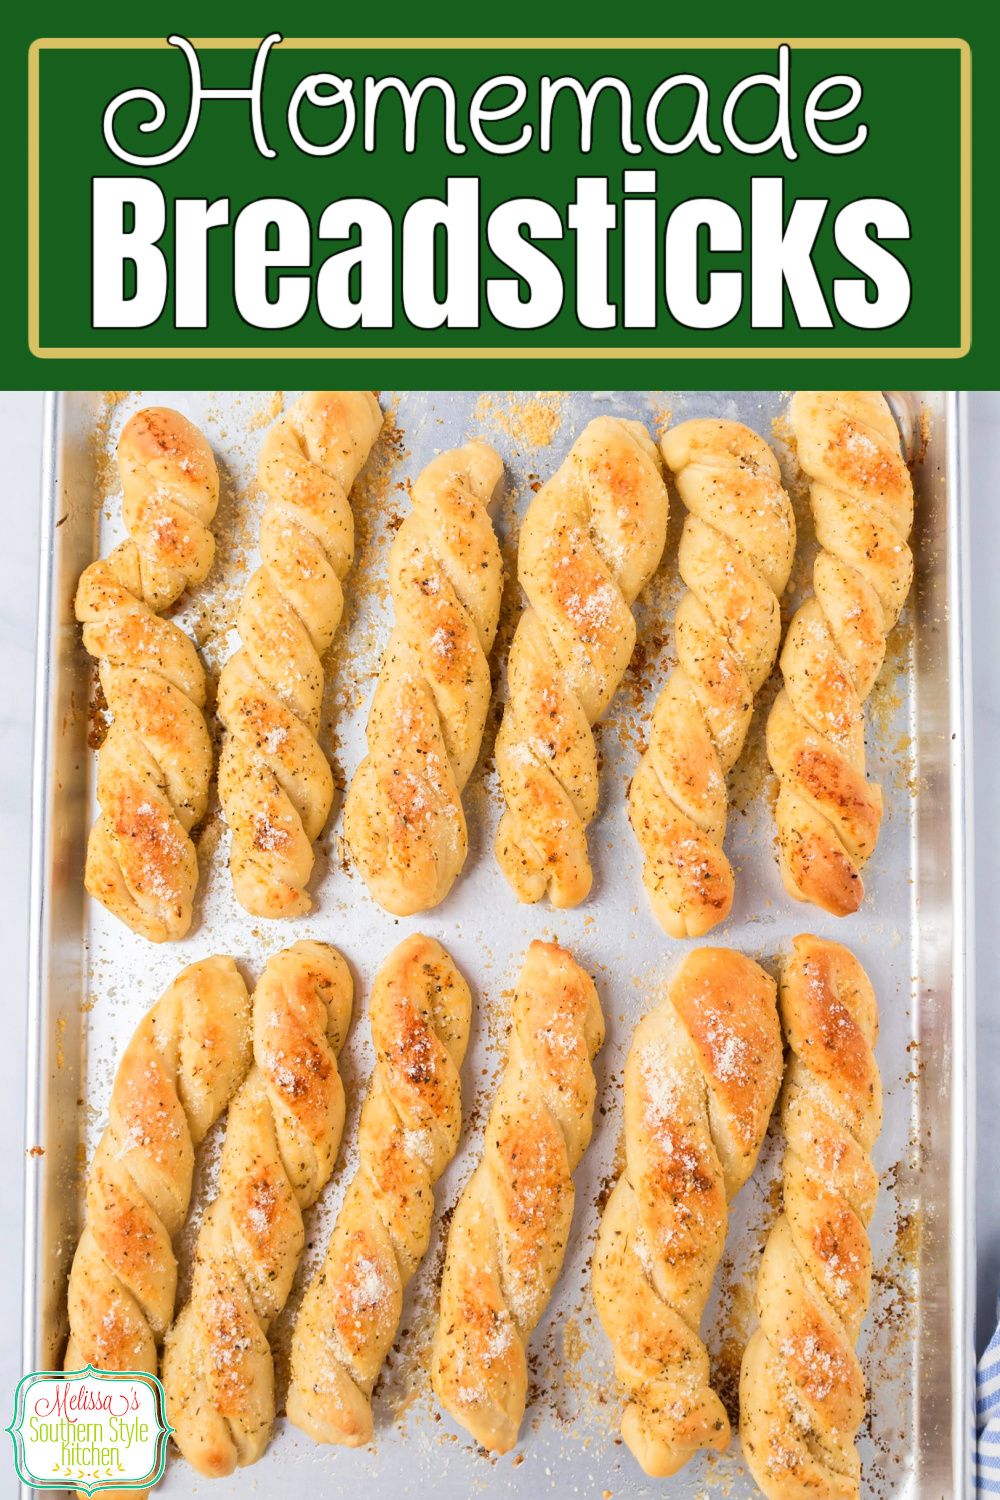 These buttery twisted Homemade Breadsticks are deliciously seasoned making them ideal for serving as an appetizer or a side dish #breadsticks #homemadebread #sourdoughbread #breadsticksrecipe #Italianbread #Italianbreadsticks #easybreadsticksrecipe via @melissasssk